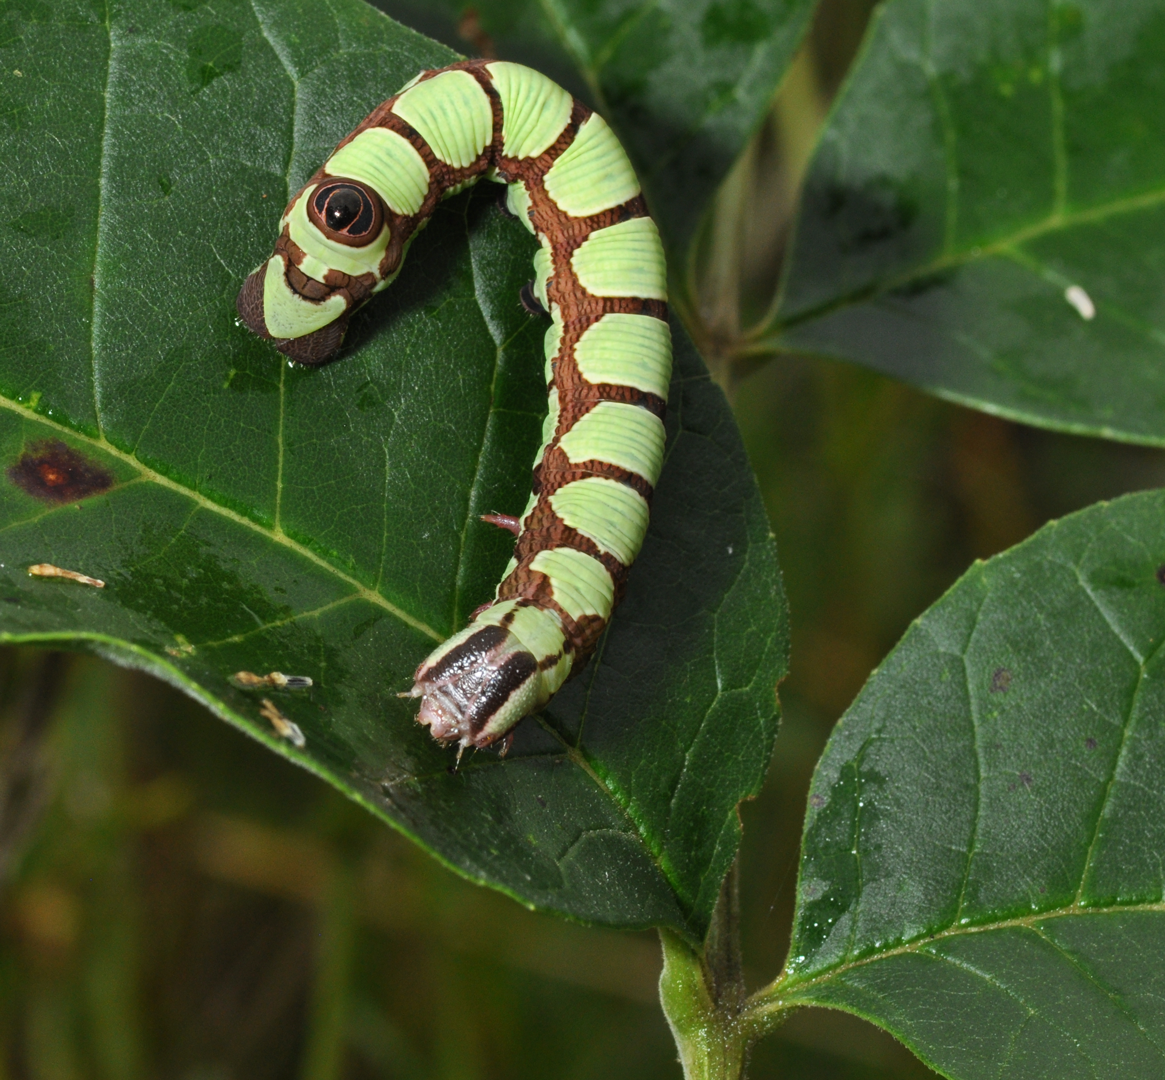 Abbot's sphinx moth caterpillar mimics a snake's eye on the back end of its body